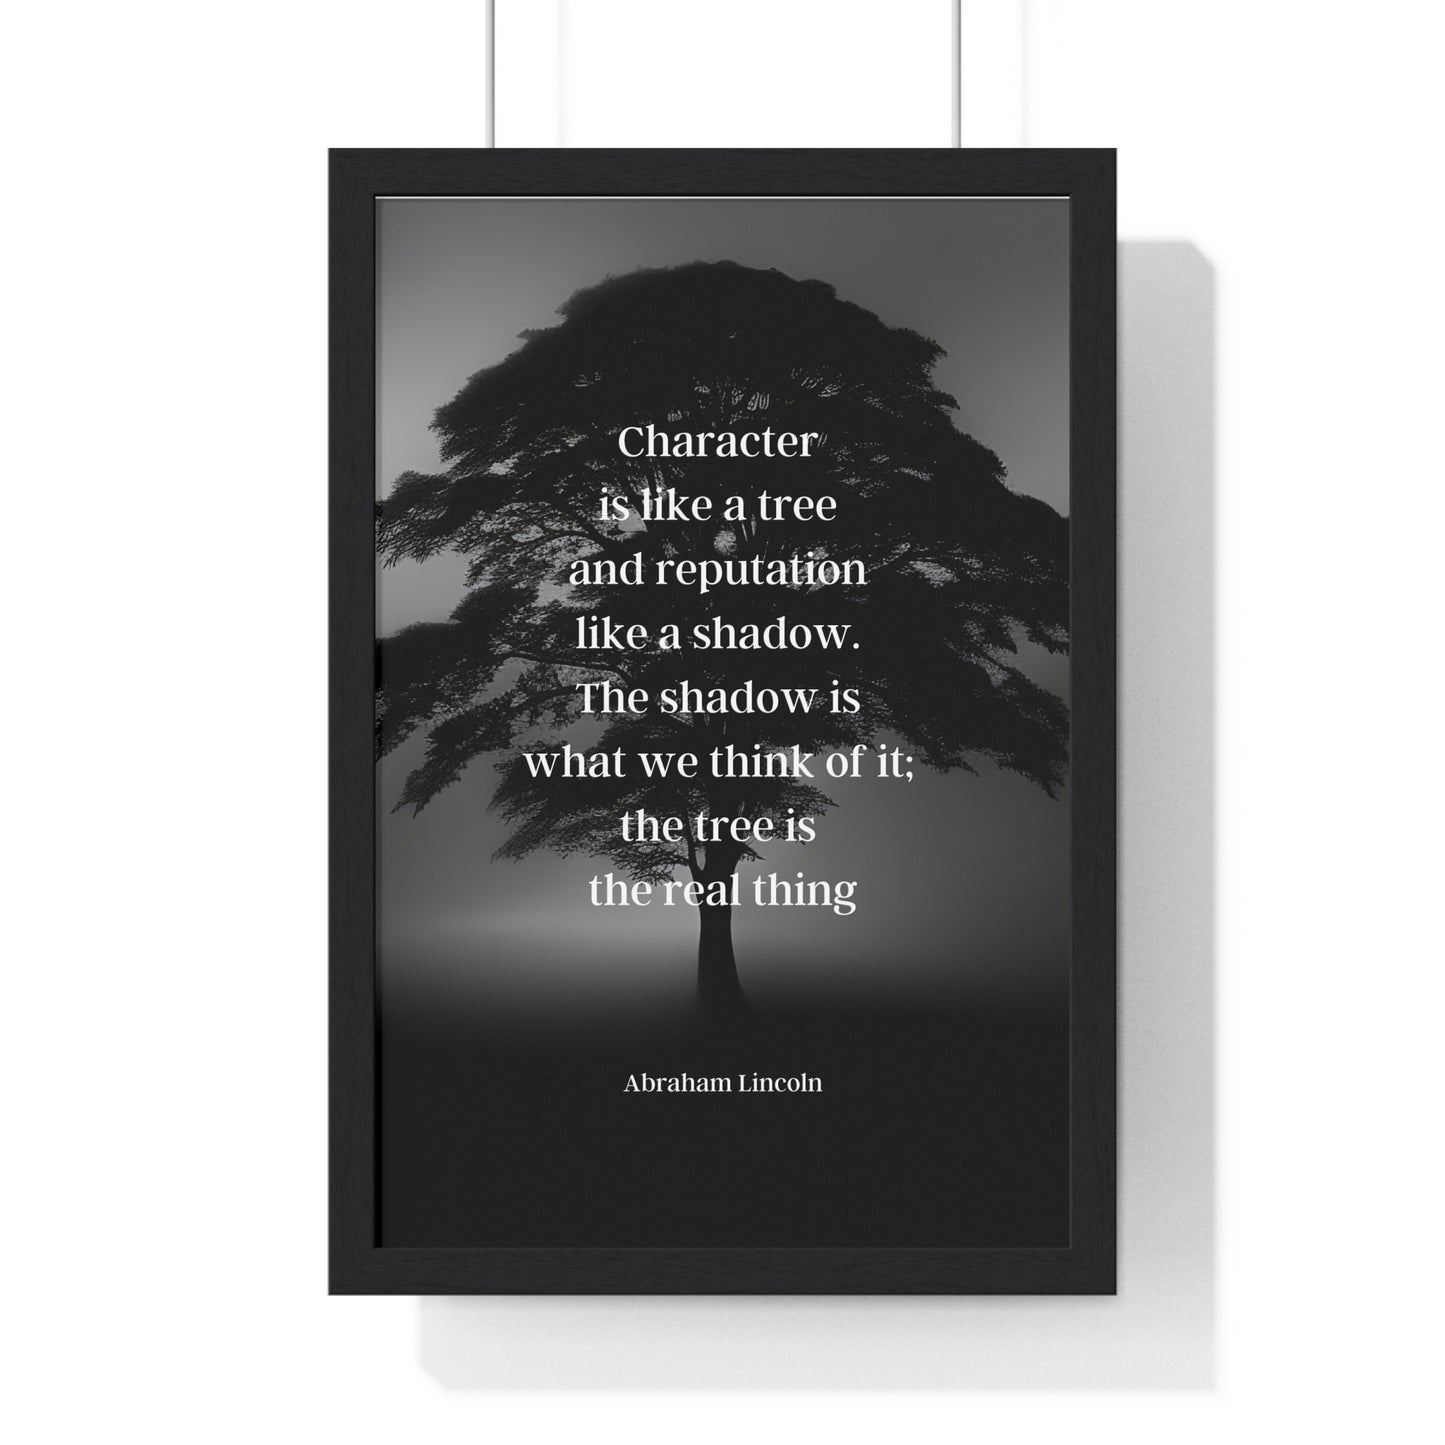 Abraham Lincoln Quote 10, Poster Art, Tree of Truth, Character, Shadow, 16th President of the United States, American Patriots, AI Art, Political Art, Presidential Quotes, Inspirational Quotes